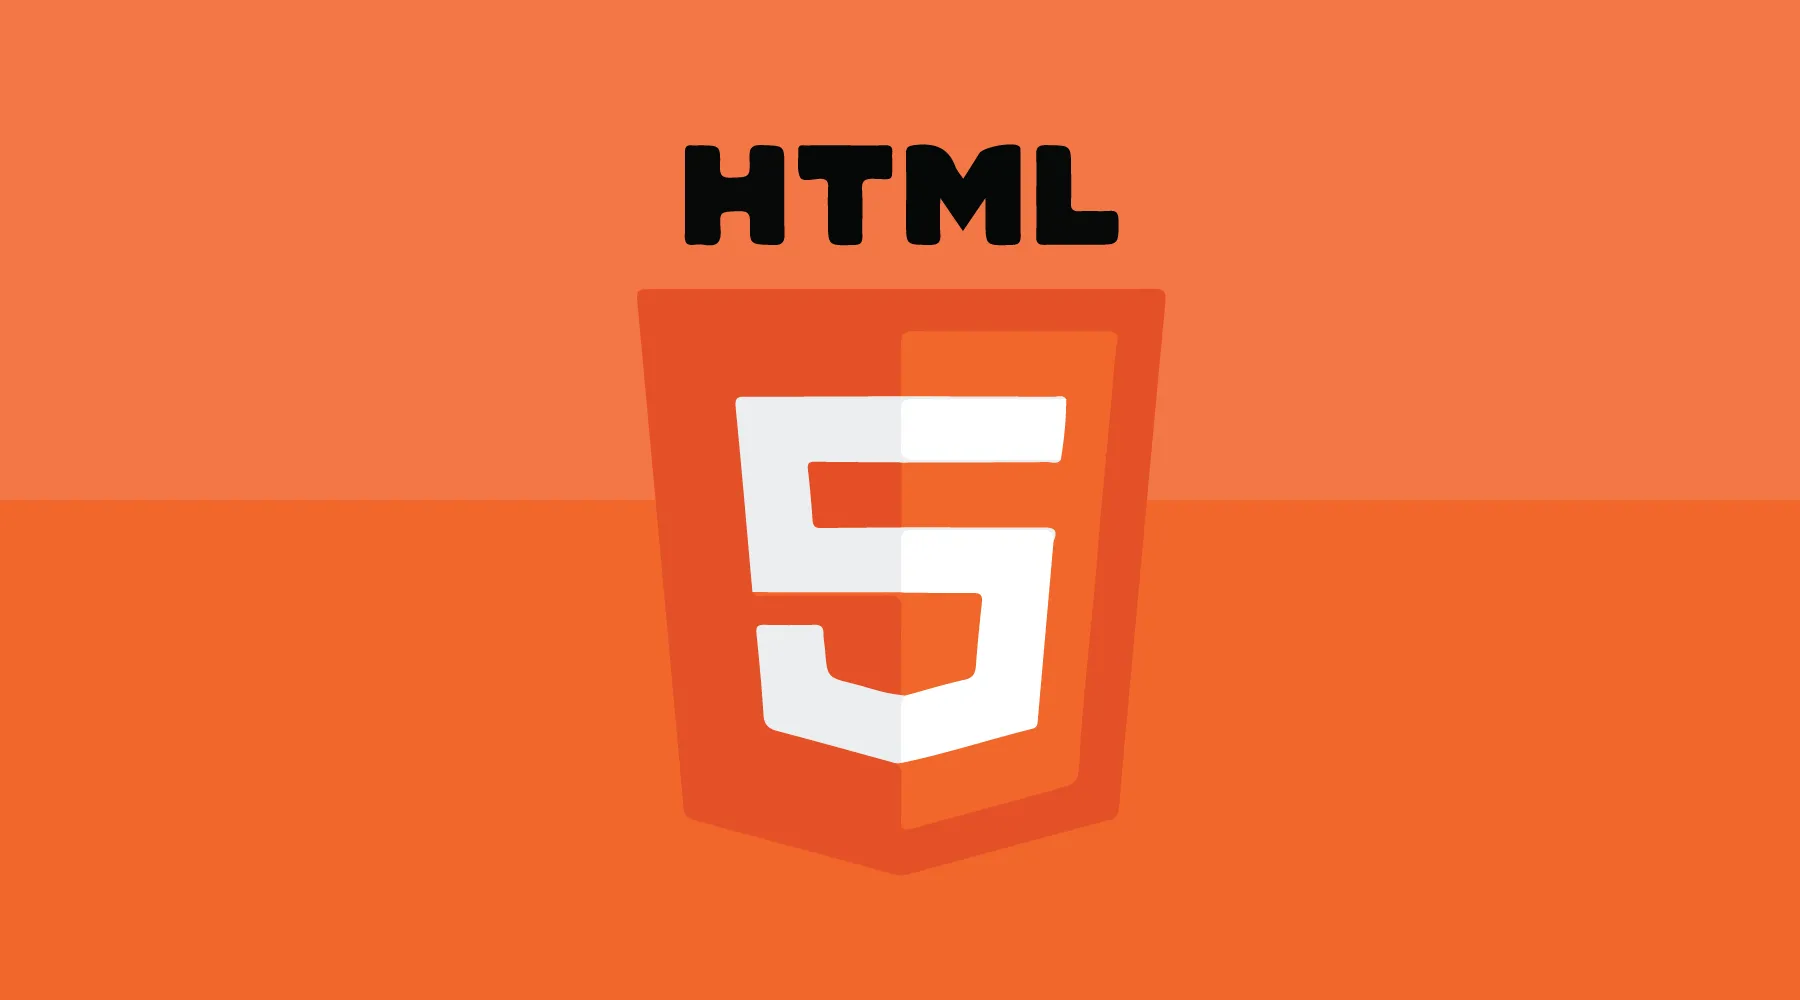 This is HTML image